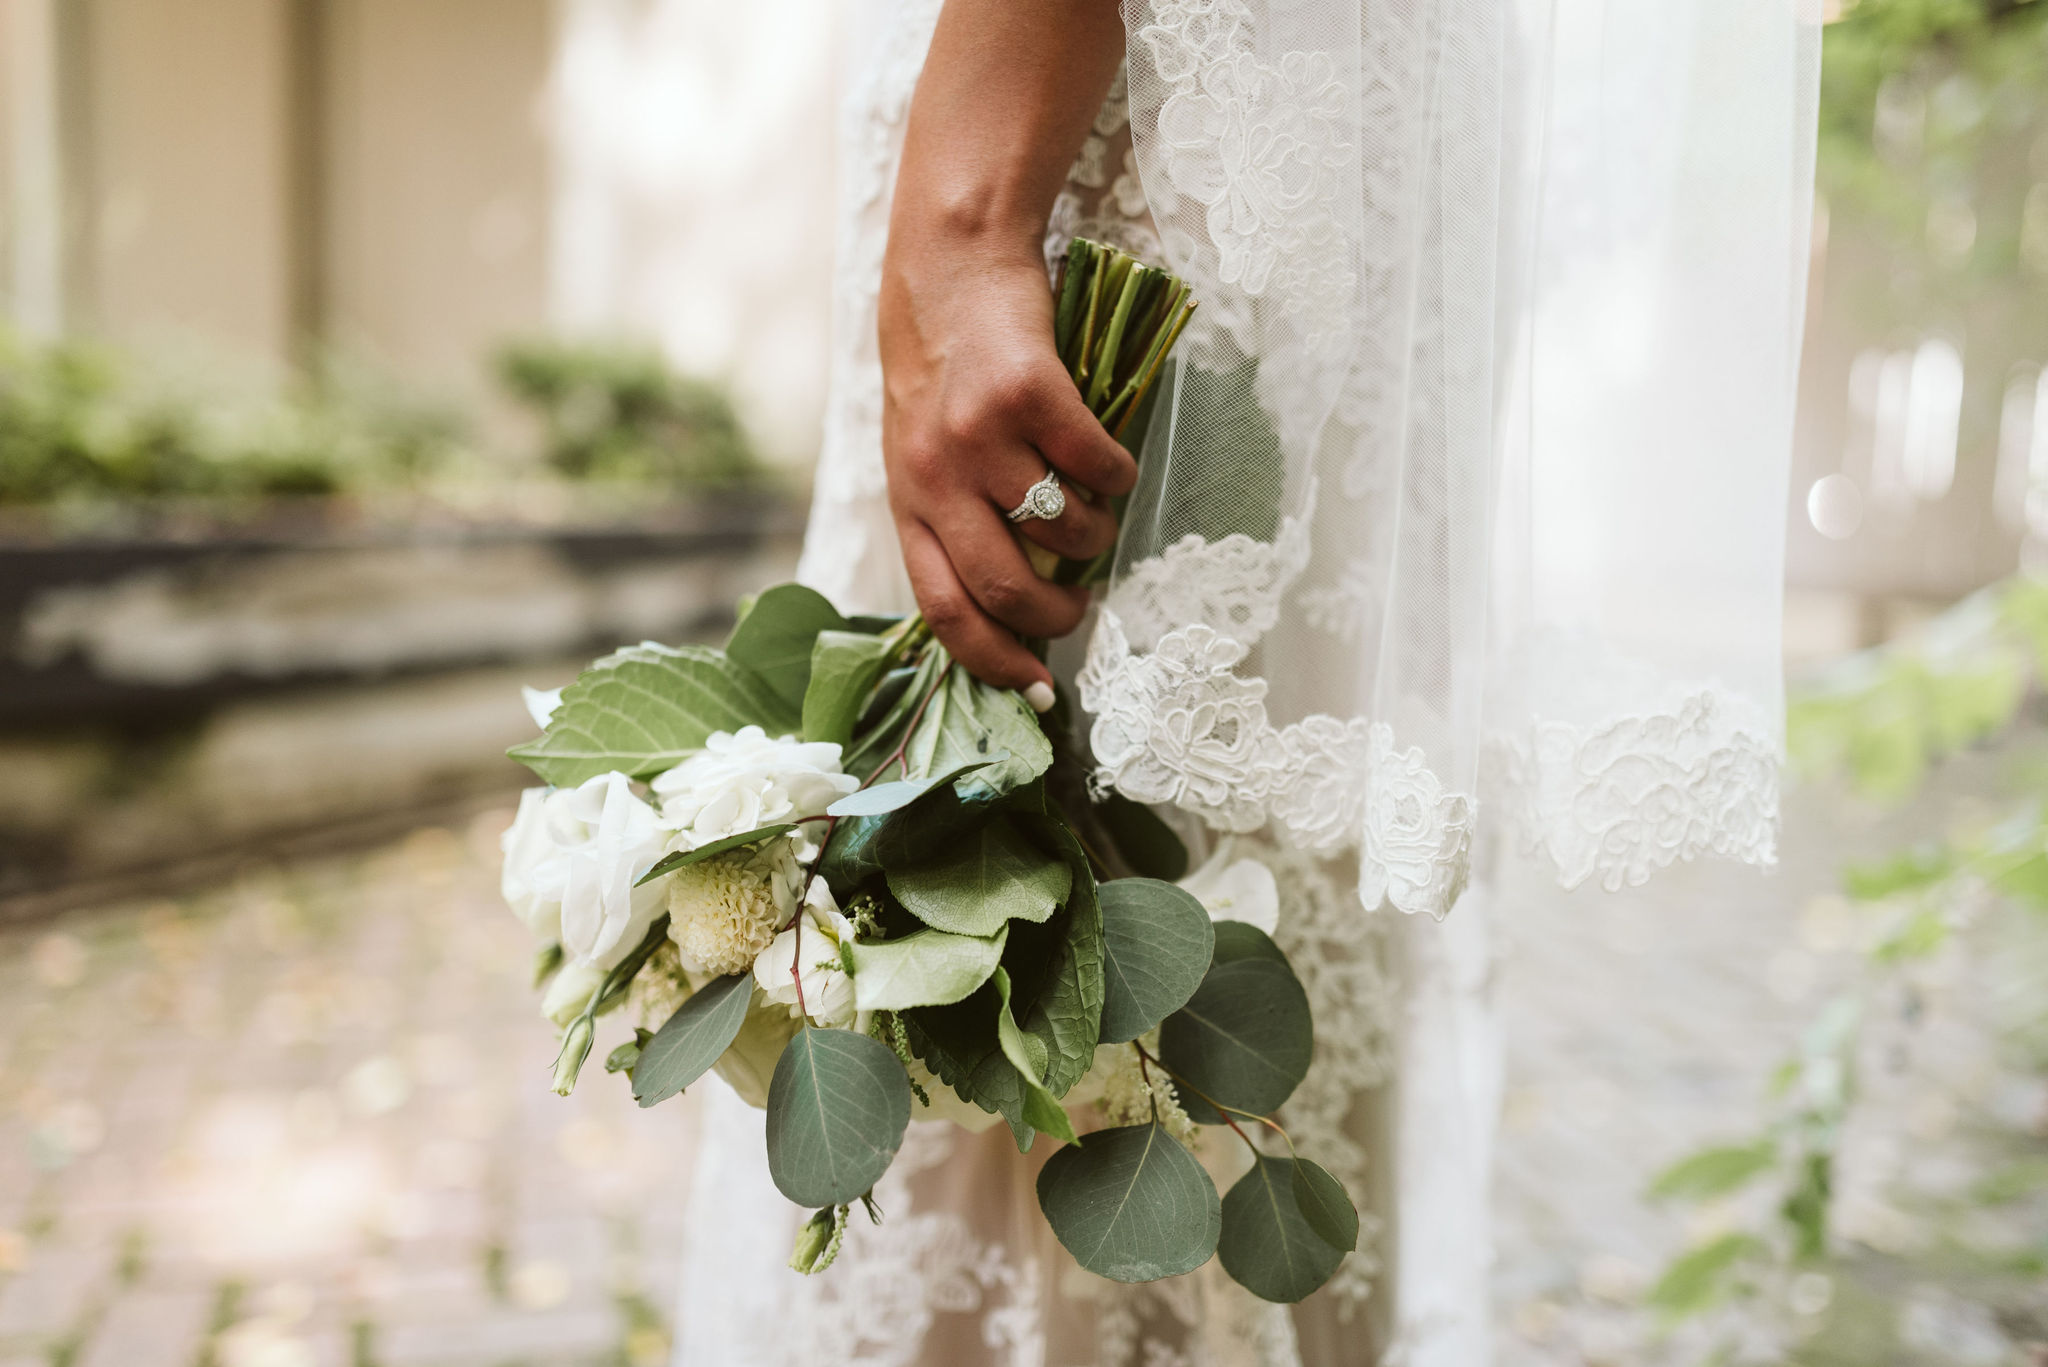  Baltimore, Maryland Wedding Photographer, Mount Vernon, Chase Court, Classic, Outdoor Ceremony, Garden, Romantic, Detail Photo of Bride Holding Bridal Bouquet, White Wedding Flowers, Engagement Rind and Wedding Ring 